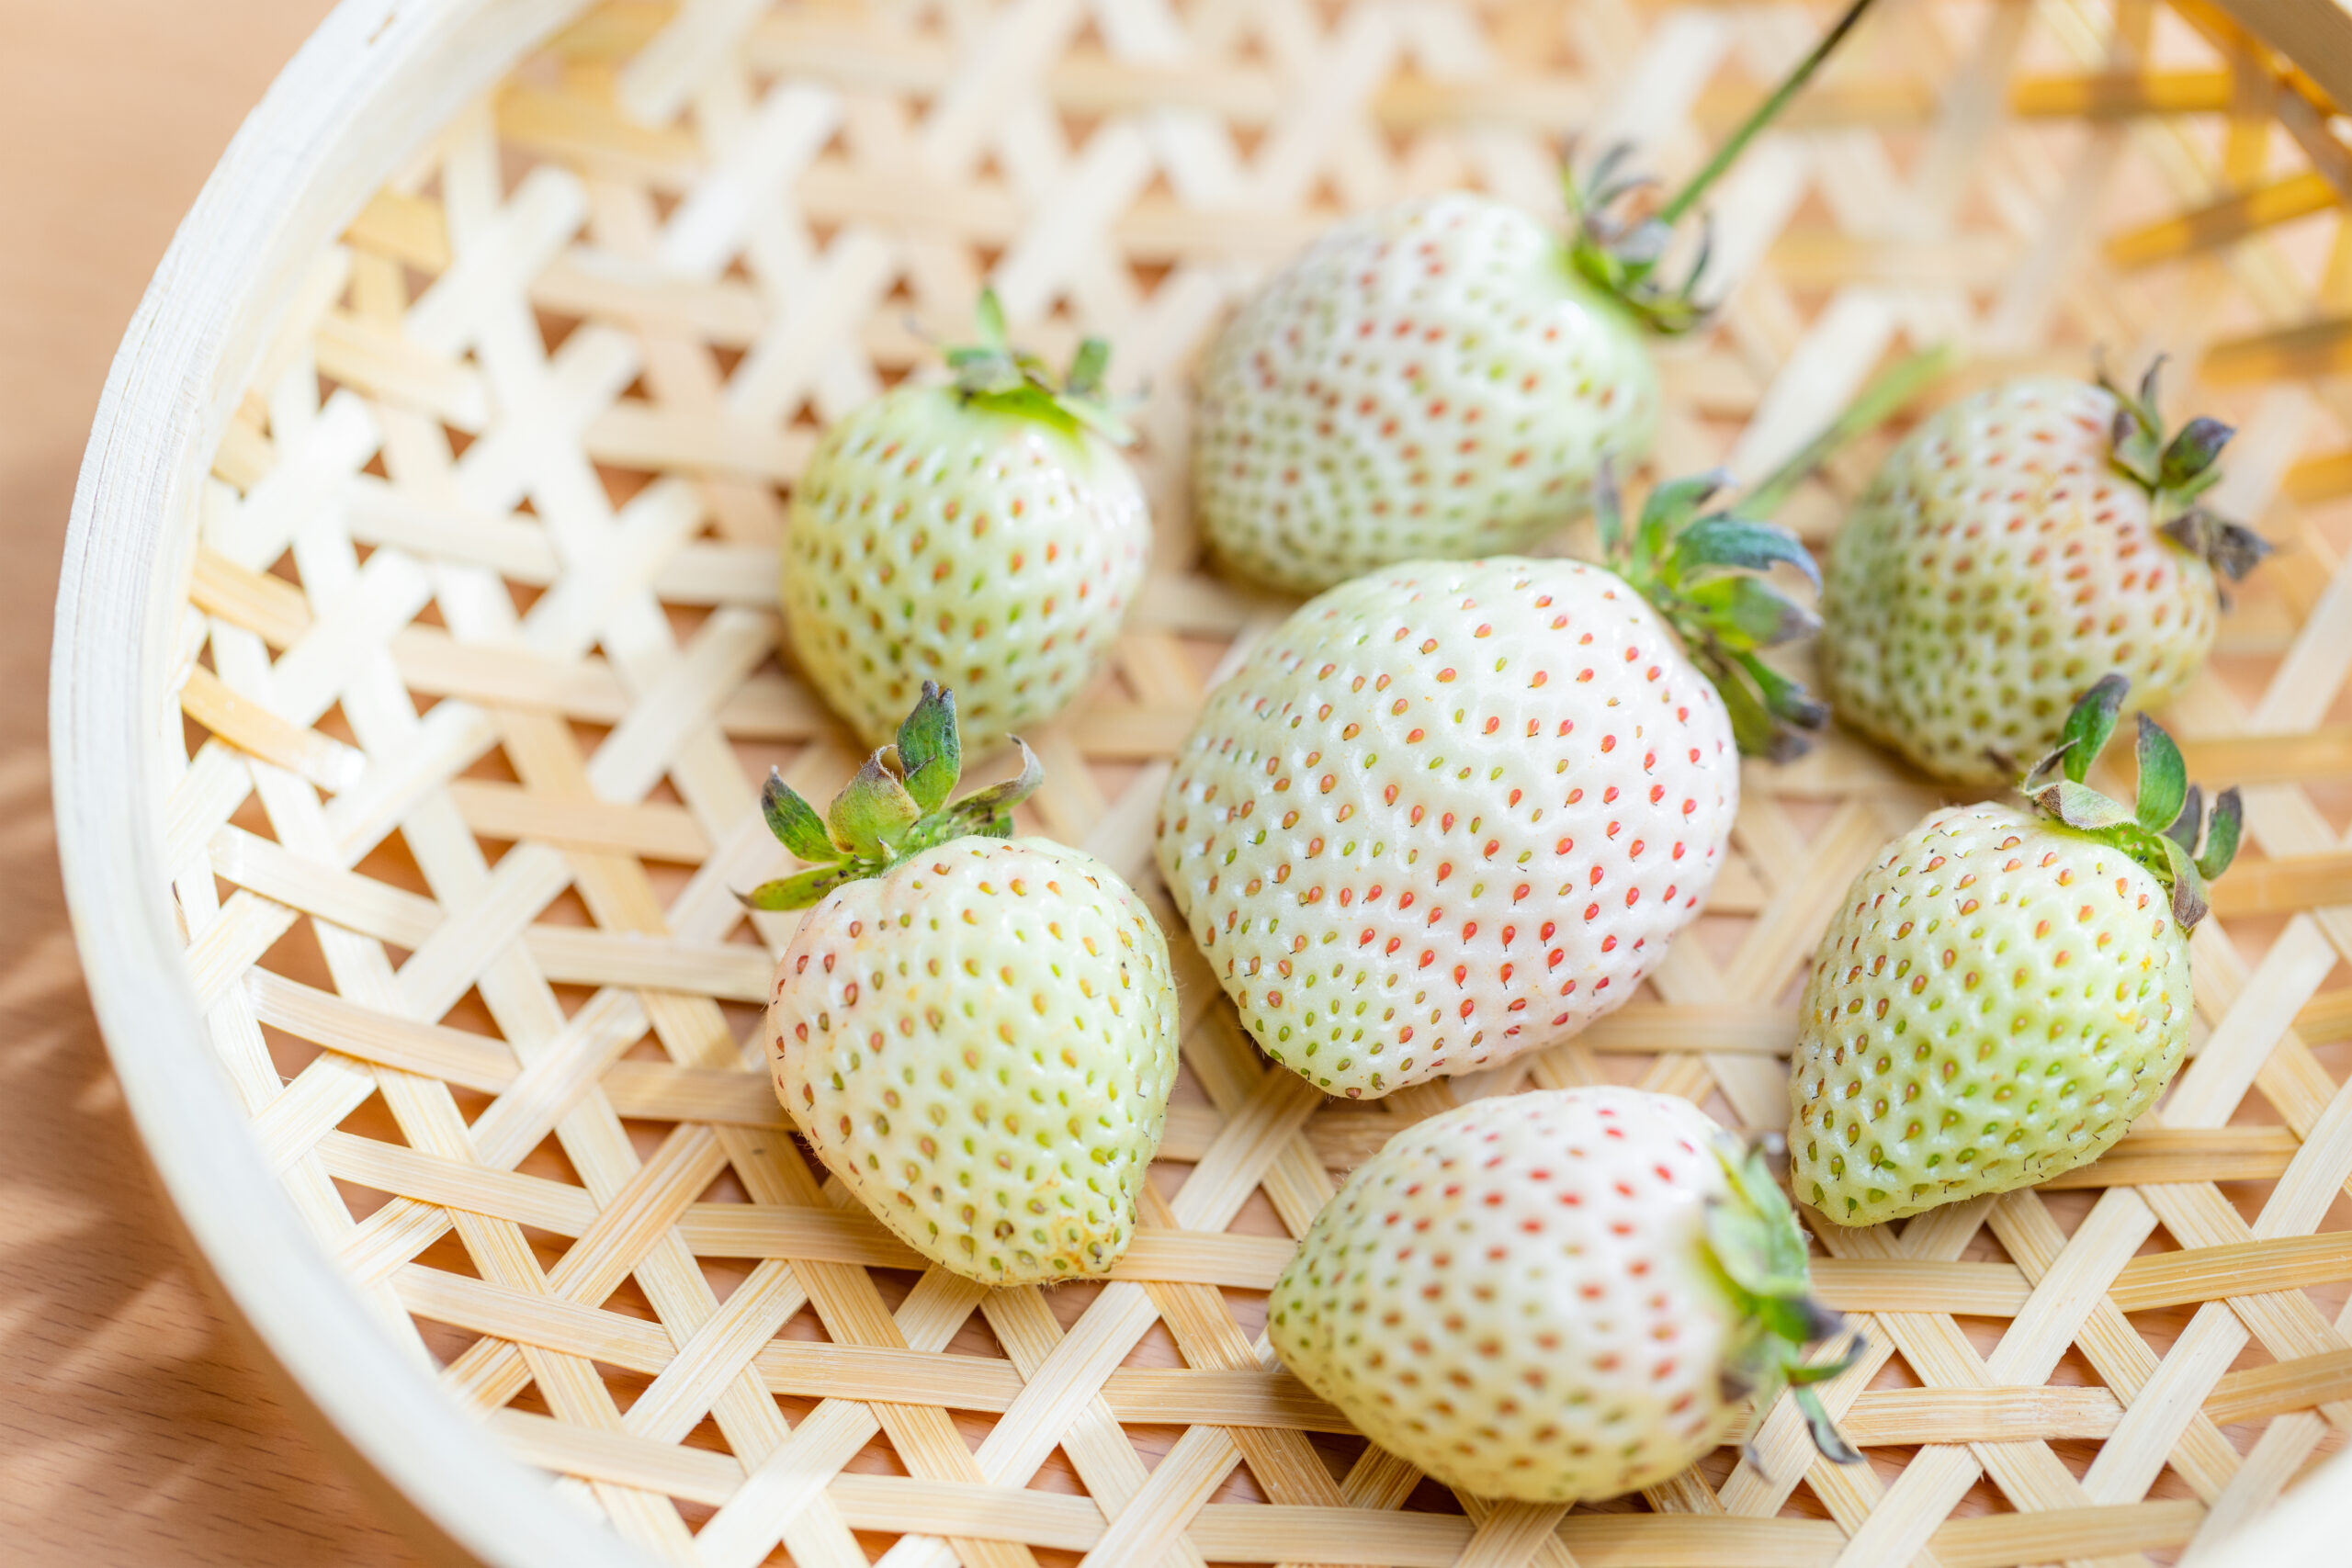 white strawberries on a basket | https://fruitsauction.com/